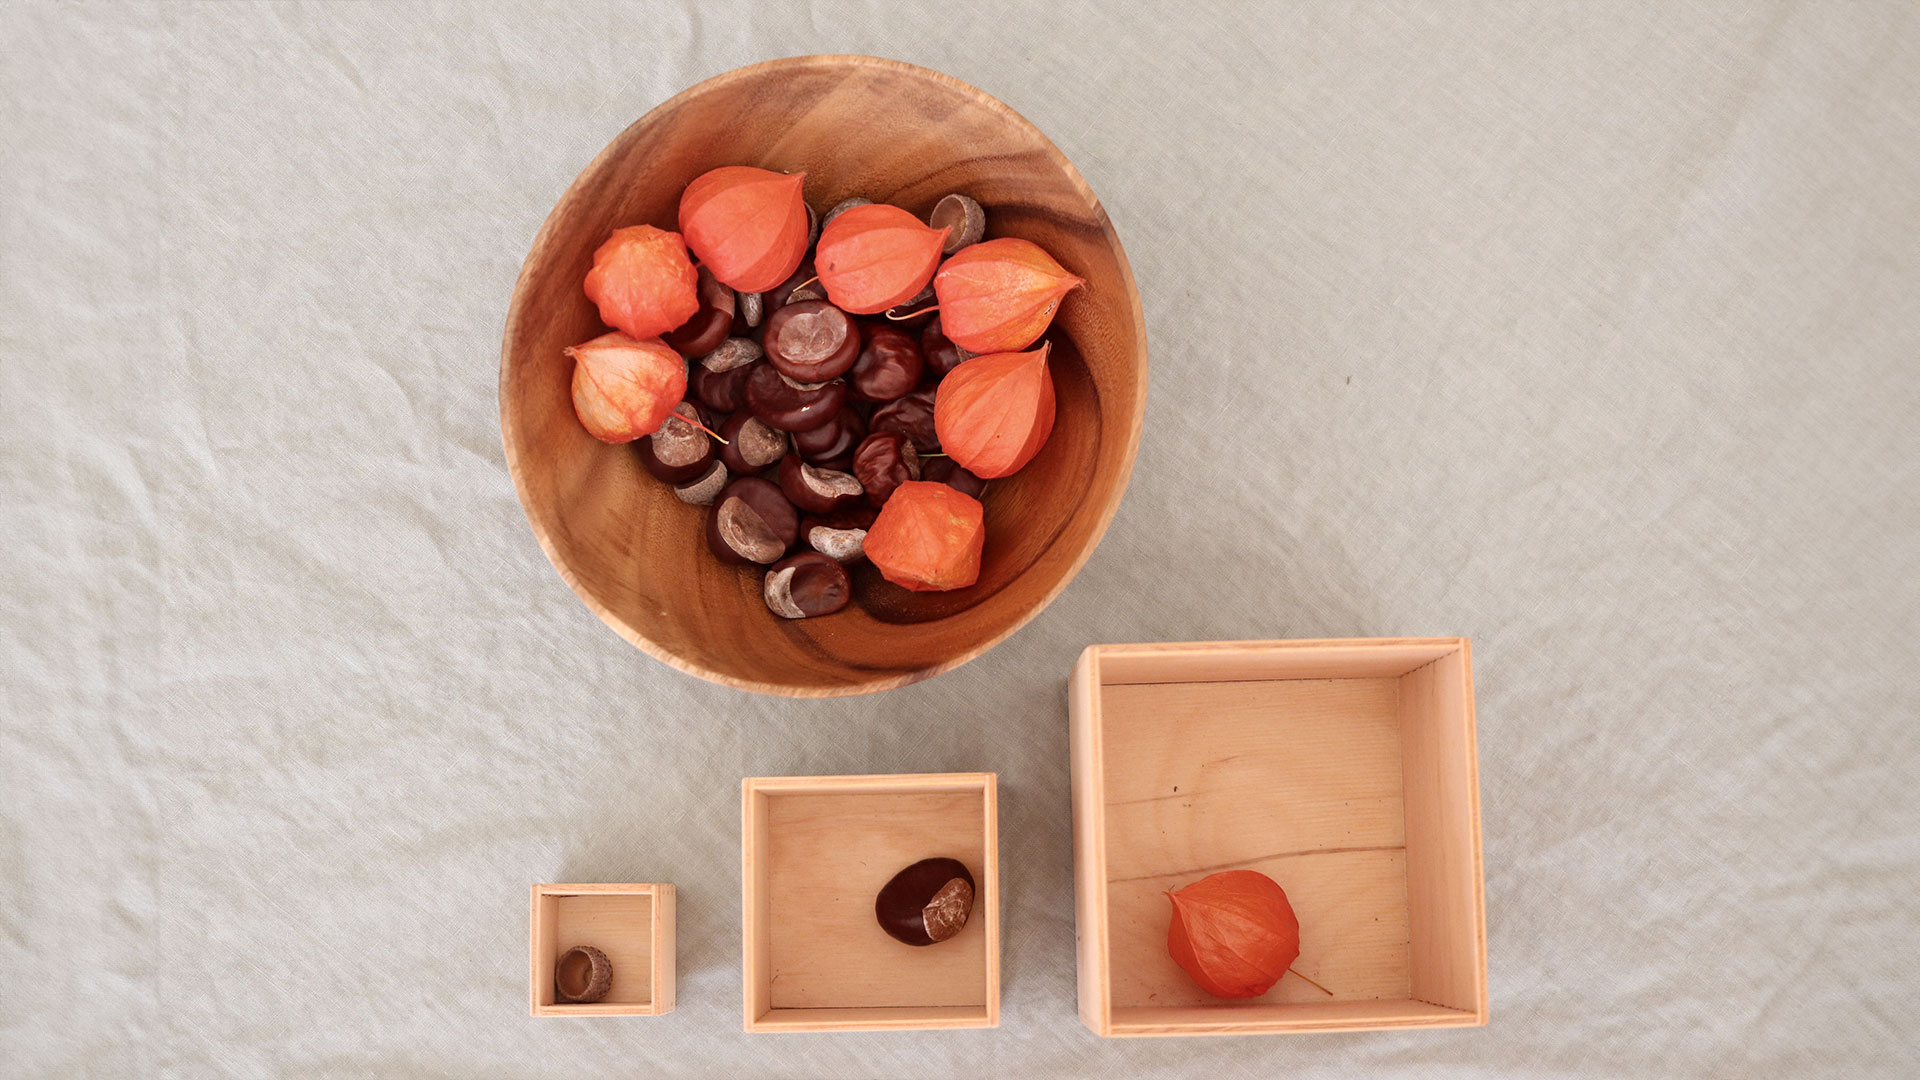 Three square wooden boxes and a round bowl filled with chestnuts and physalis are on a table.